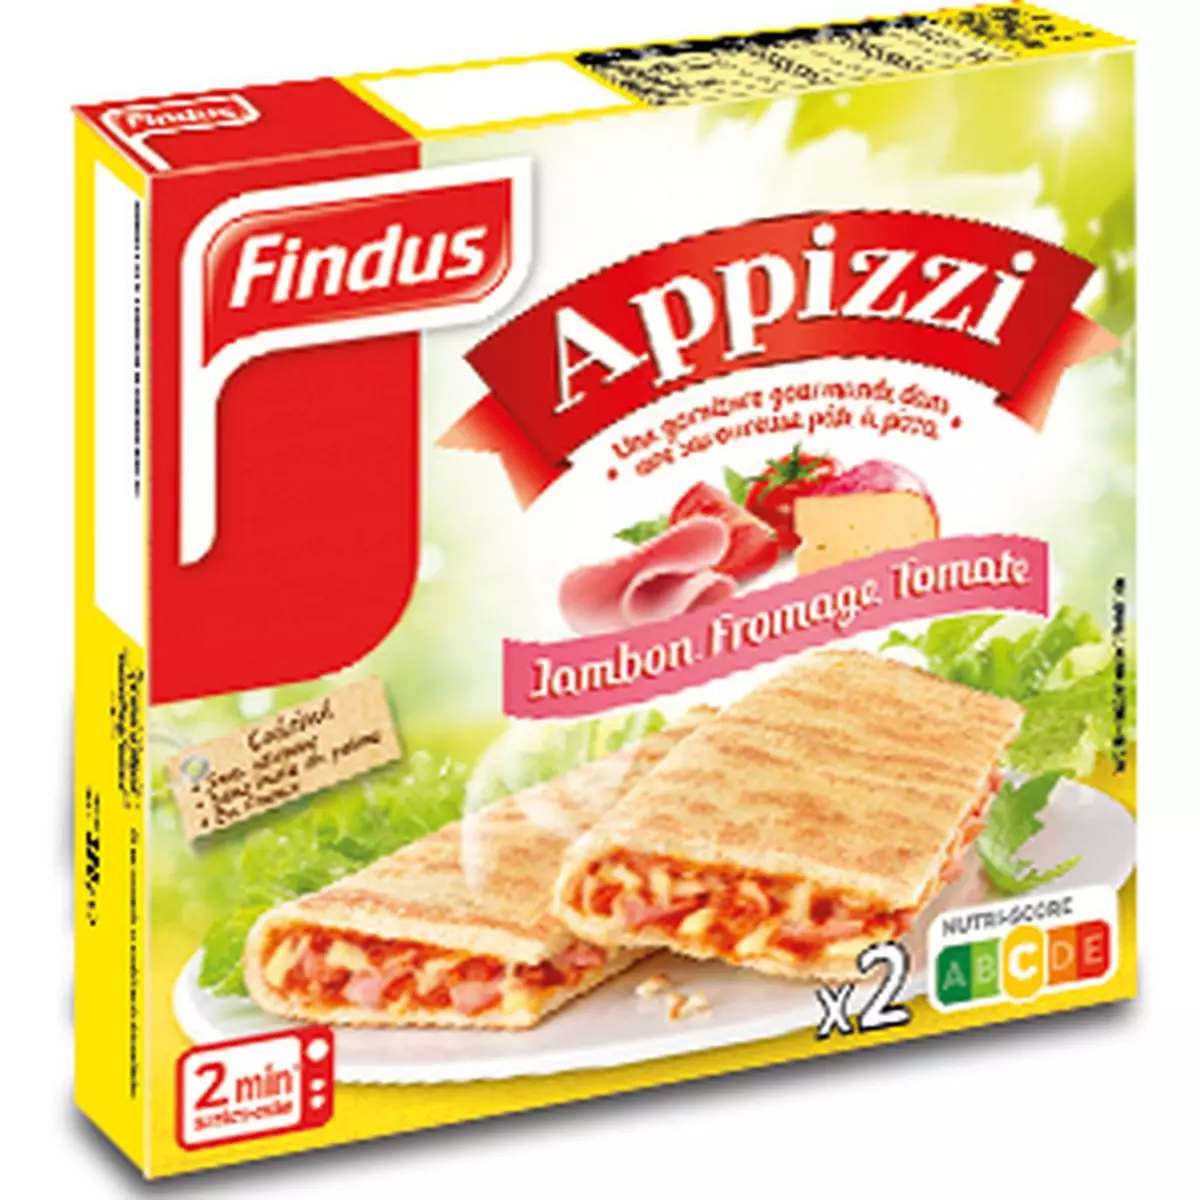 FINDUS Appizzi jambon fromage tomate 2 pièces 250g